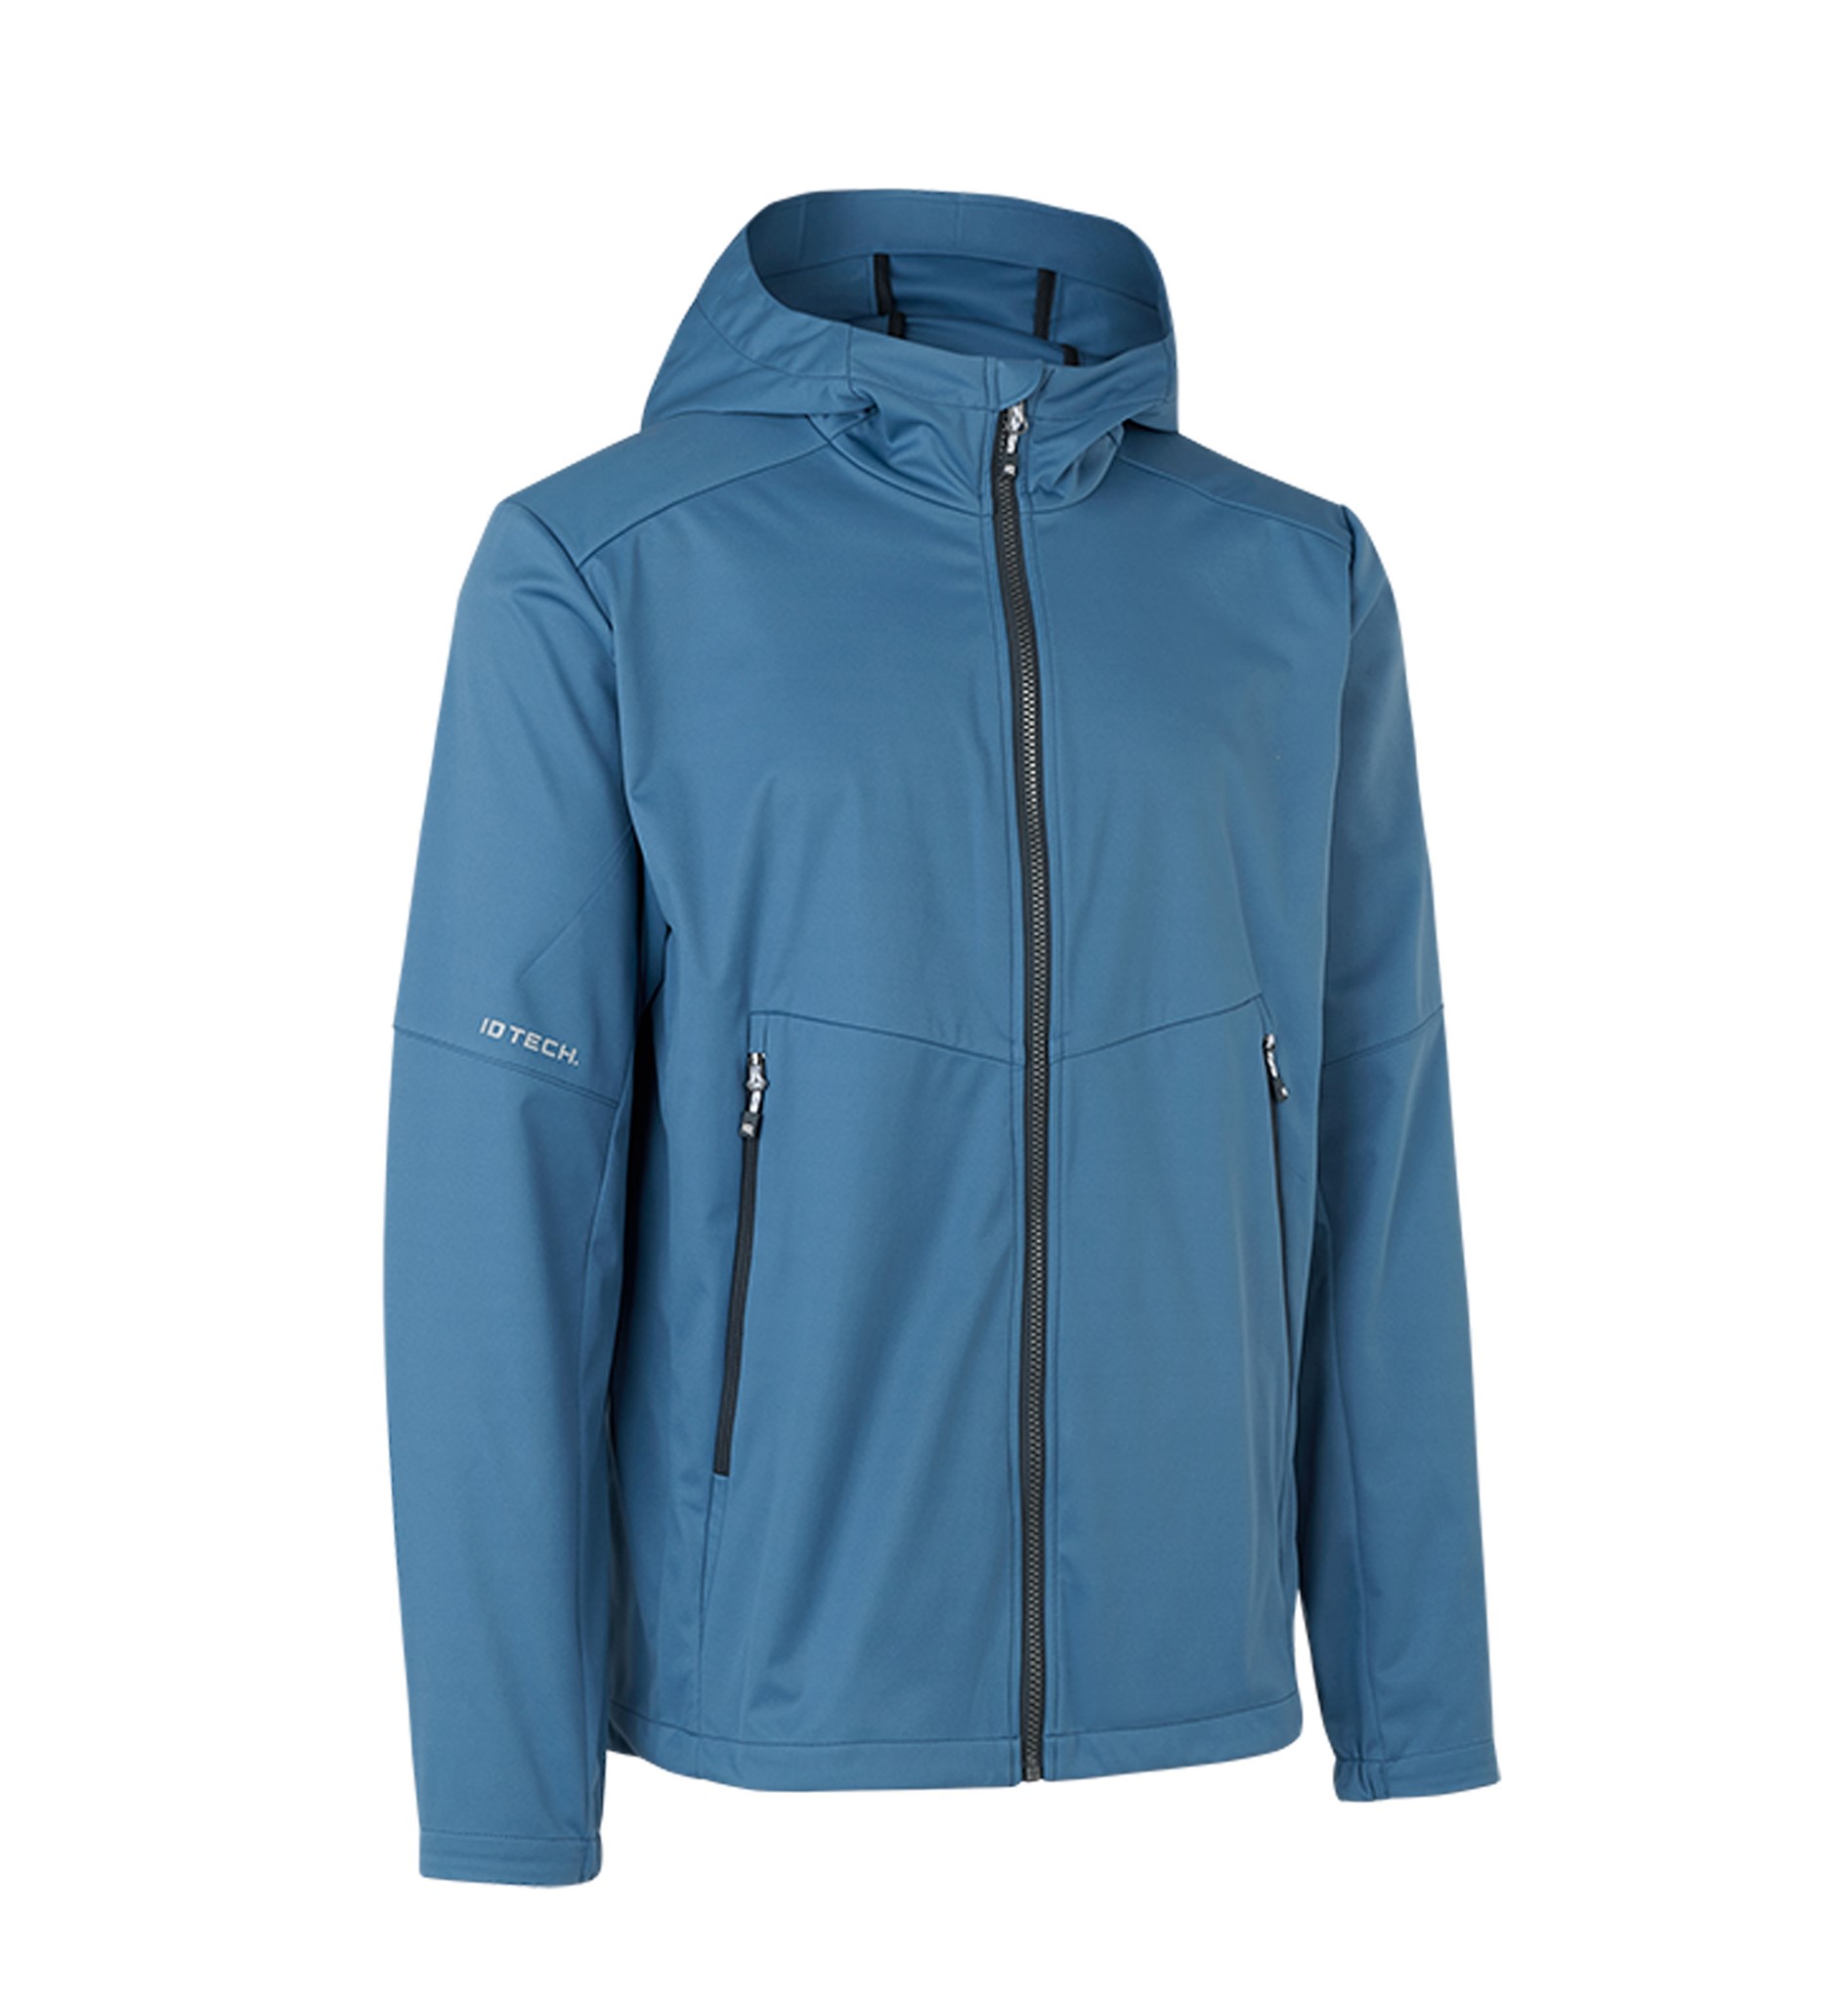 Picture of Men's soft shell jacket light